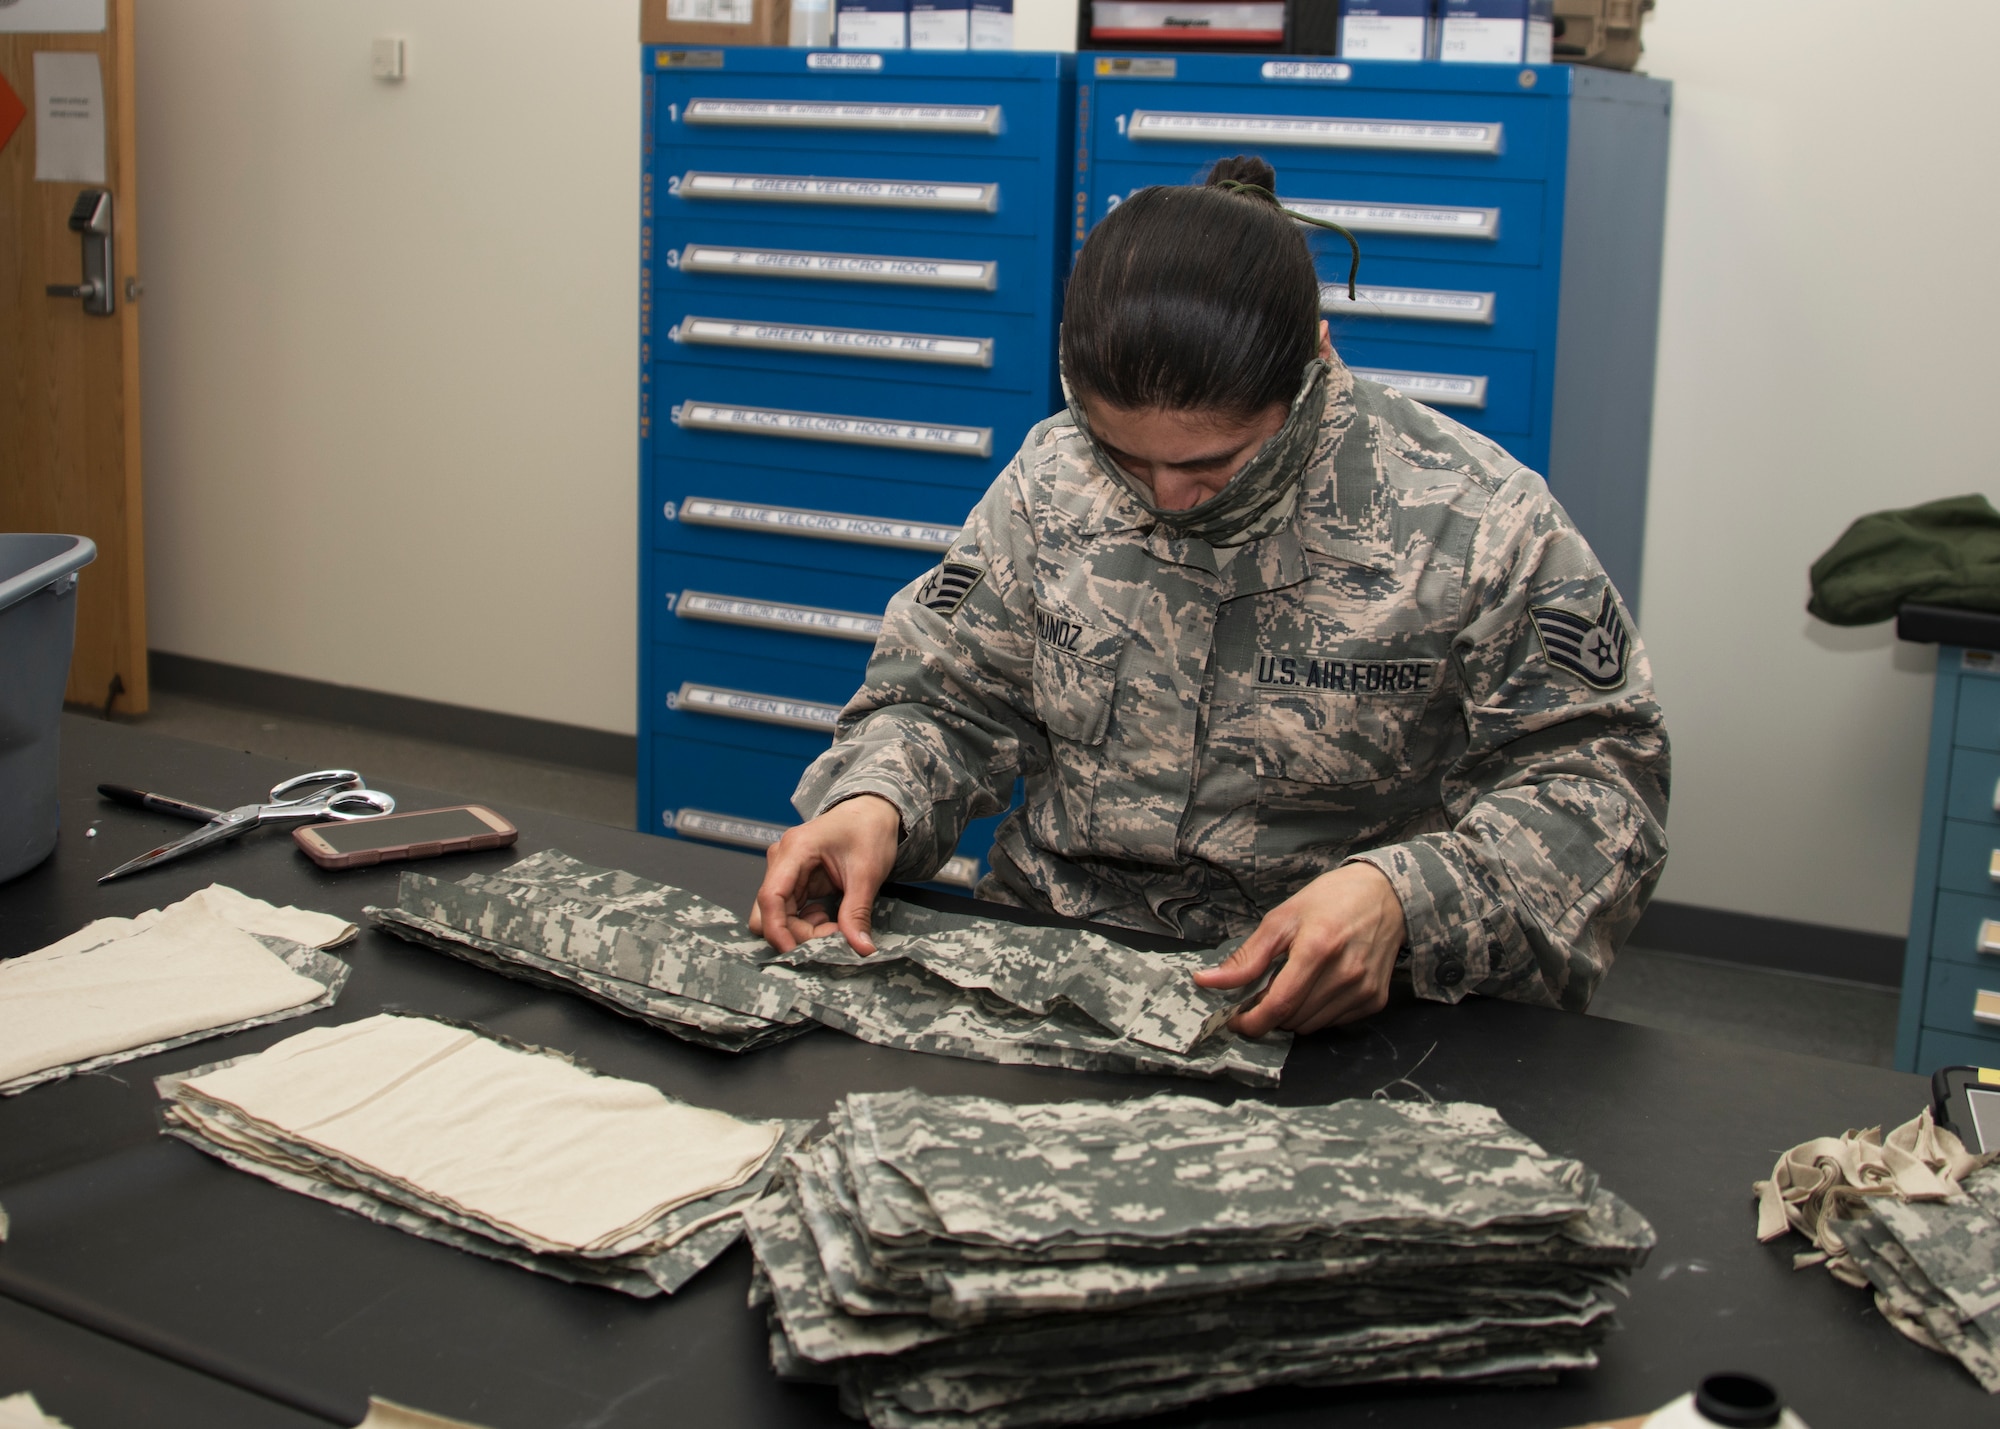 Staff Sgt. Viridiana Munoz, 459th Operations Support Squadron, Aircrew Flight Equipment technician, separates fabric for face masks, April 10th, 2020, at Joint Base Andrews, Md. Munoz and her team are able to make the masks using old uniforms provided by the 459th Logistics Readiness Squadron in addition to supplies from the AFE shop. The team plans to make 1,000 masks to be distributed to aircrew, maintainers and members of the wing. (U.S. Air Force photo/Staff Sgt. Cierra Presentado)